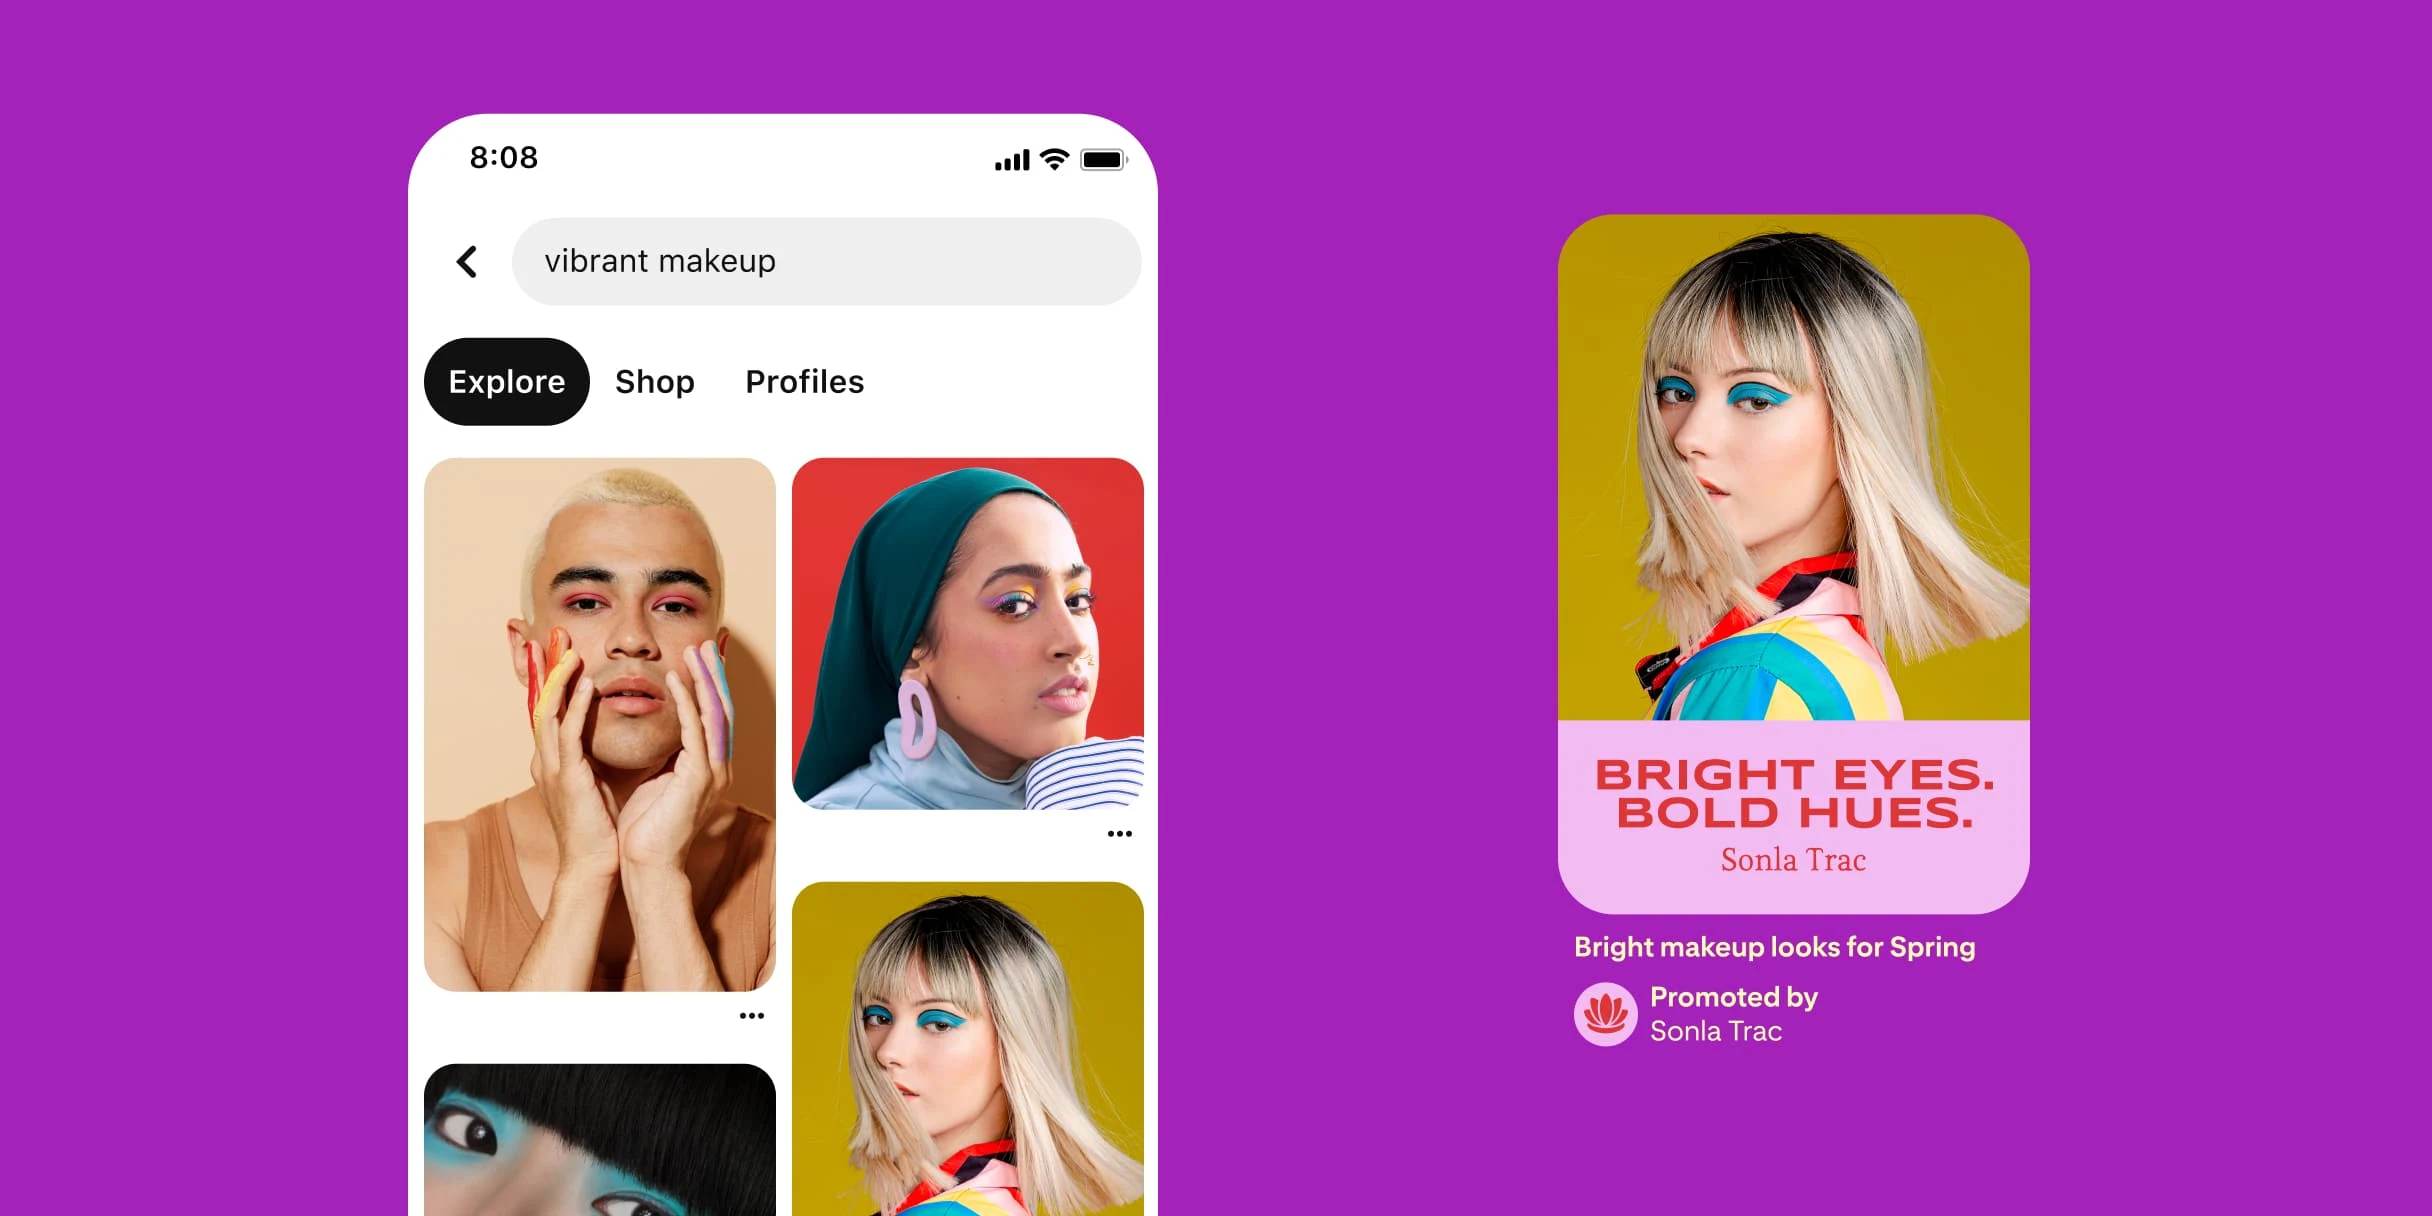 Pinterest search results for vibrant make-up. A white man with short blonde hair and pink eyelids. A brown-skinned woman with a blue head wrap and rainbow eyelids. An East Asian woman with misty blue eyelids. A Pin of a white woman with long blonde hair and bright blue eyelids on a yellow background. Text on pink background that reads, ‘Bright eyes. Bold hues’. The description is ‘Bright make-up looks for spring’.